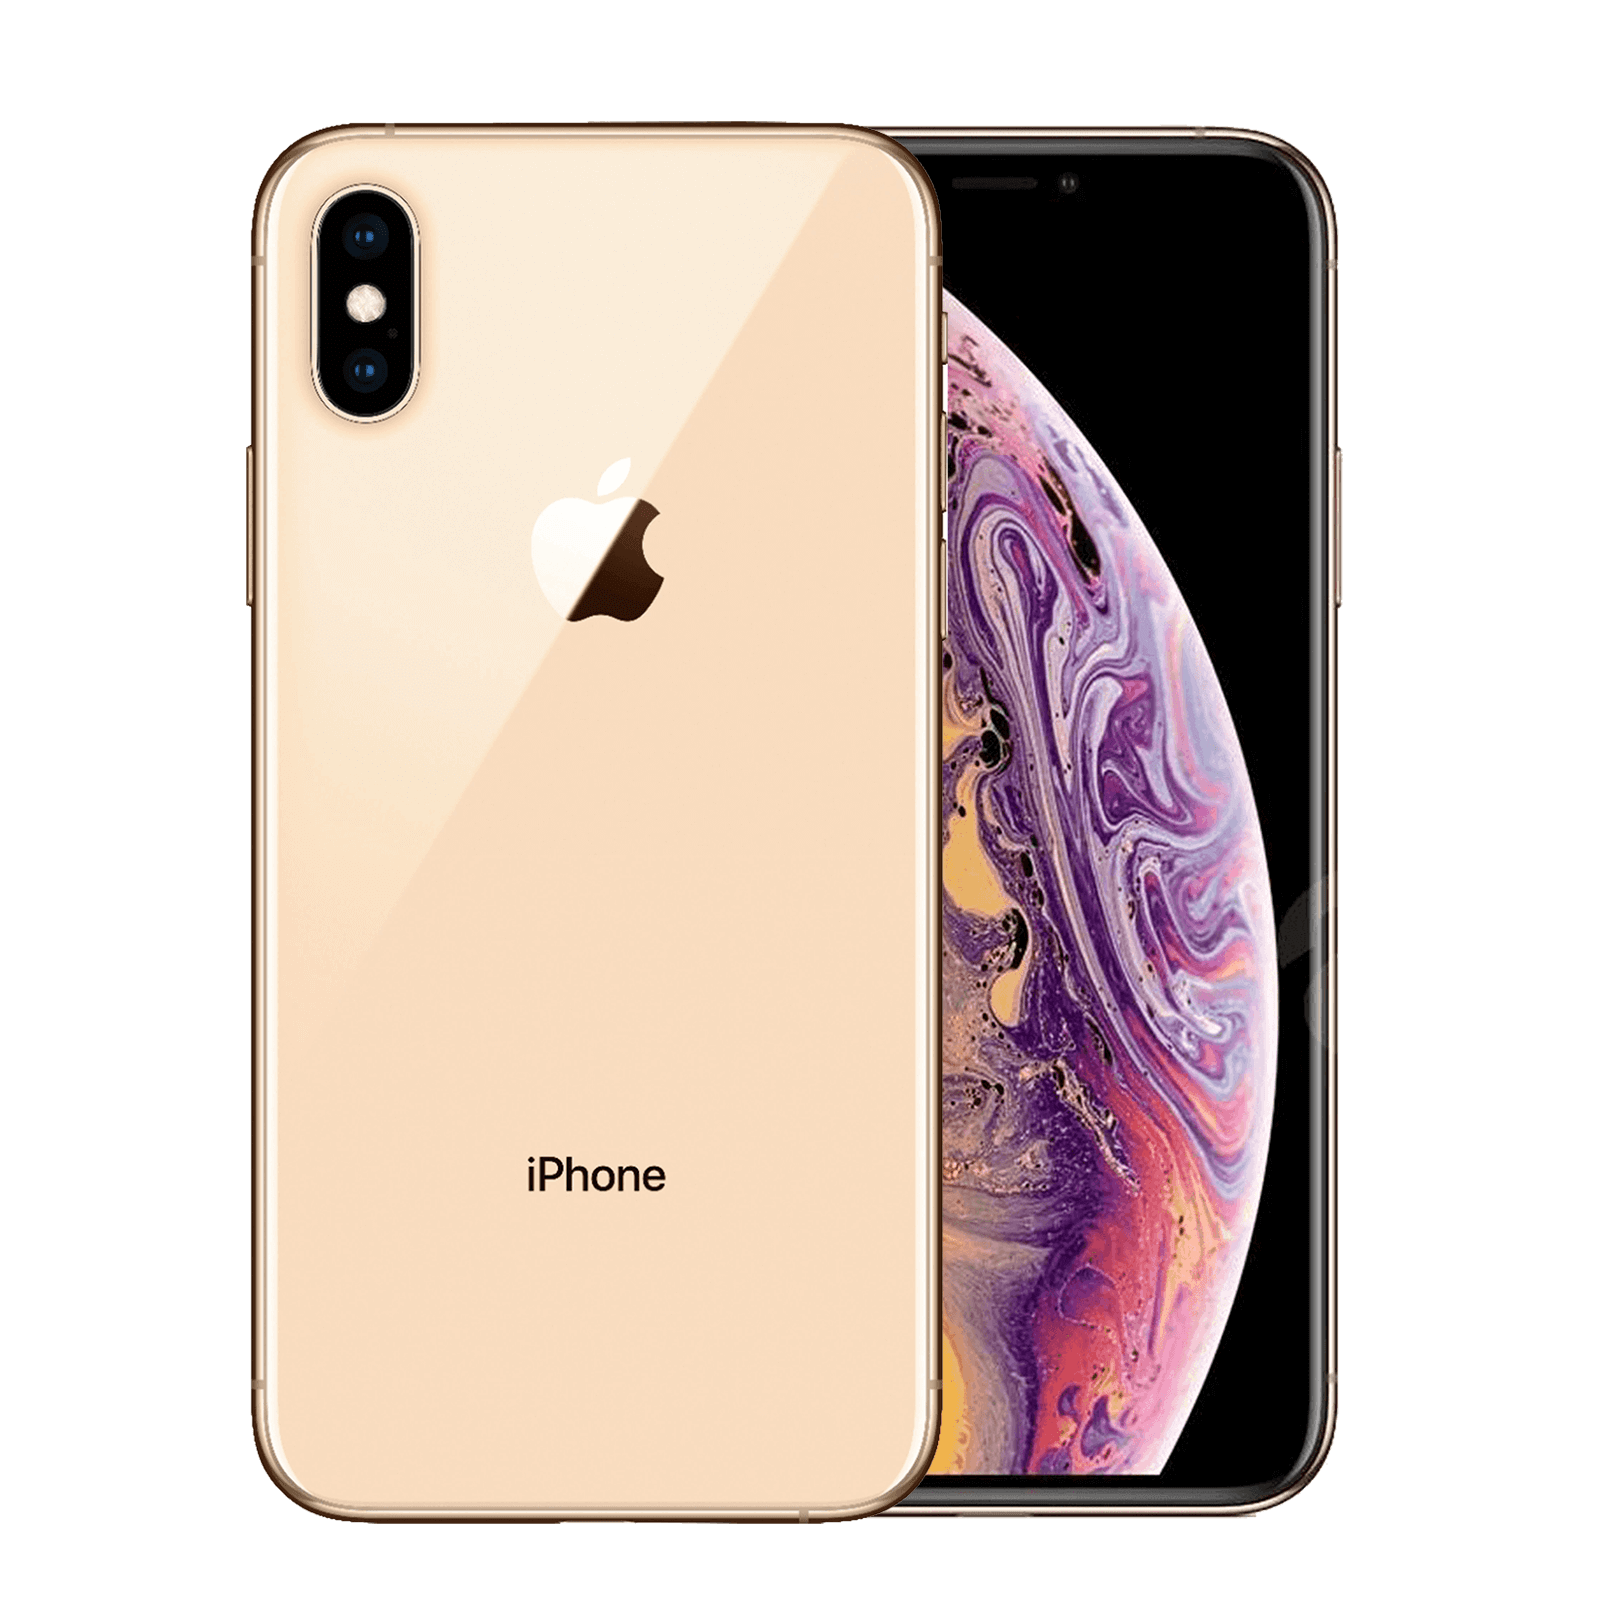 Apple iPhone XS Max 512GB Gold Very Good - T-Mobile